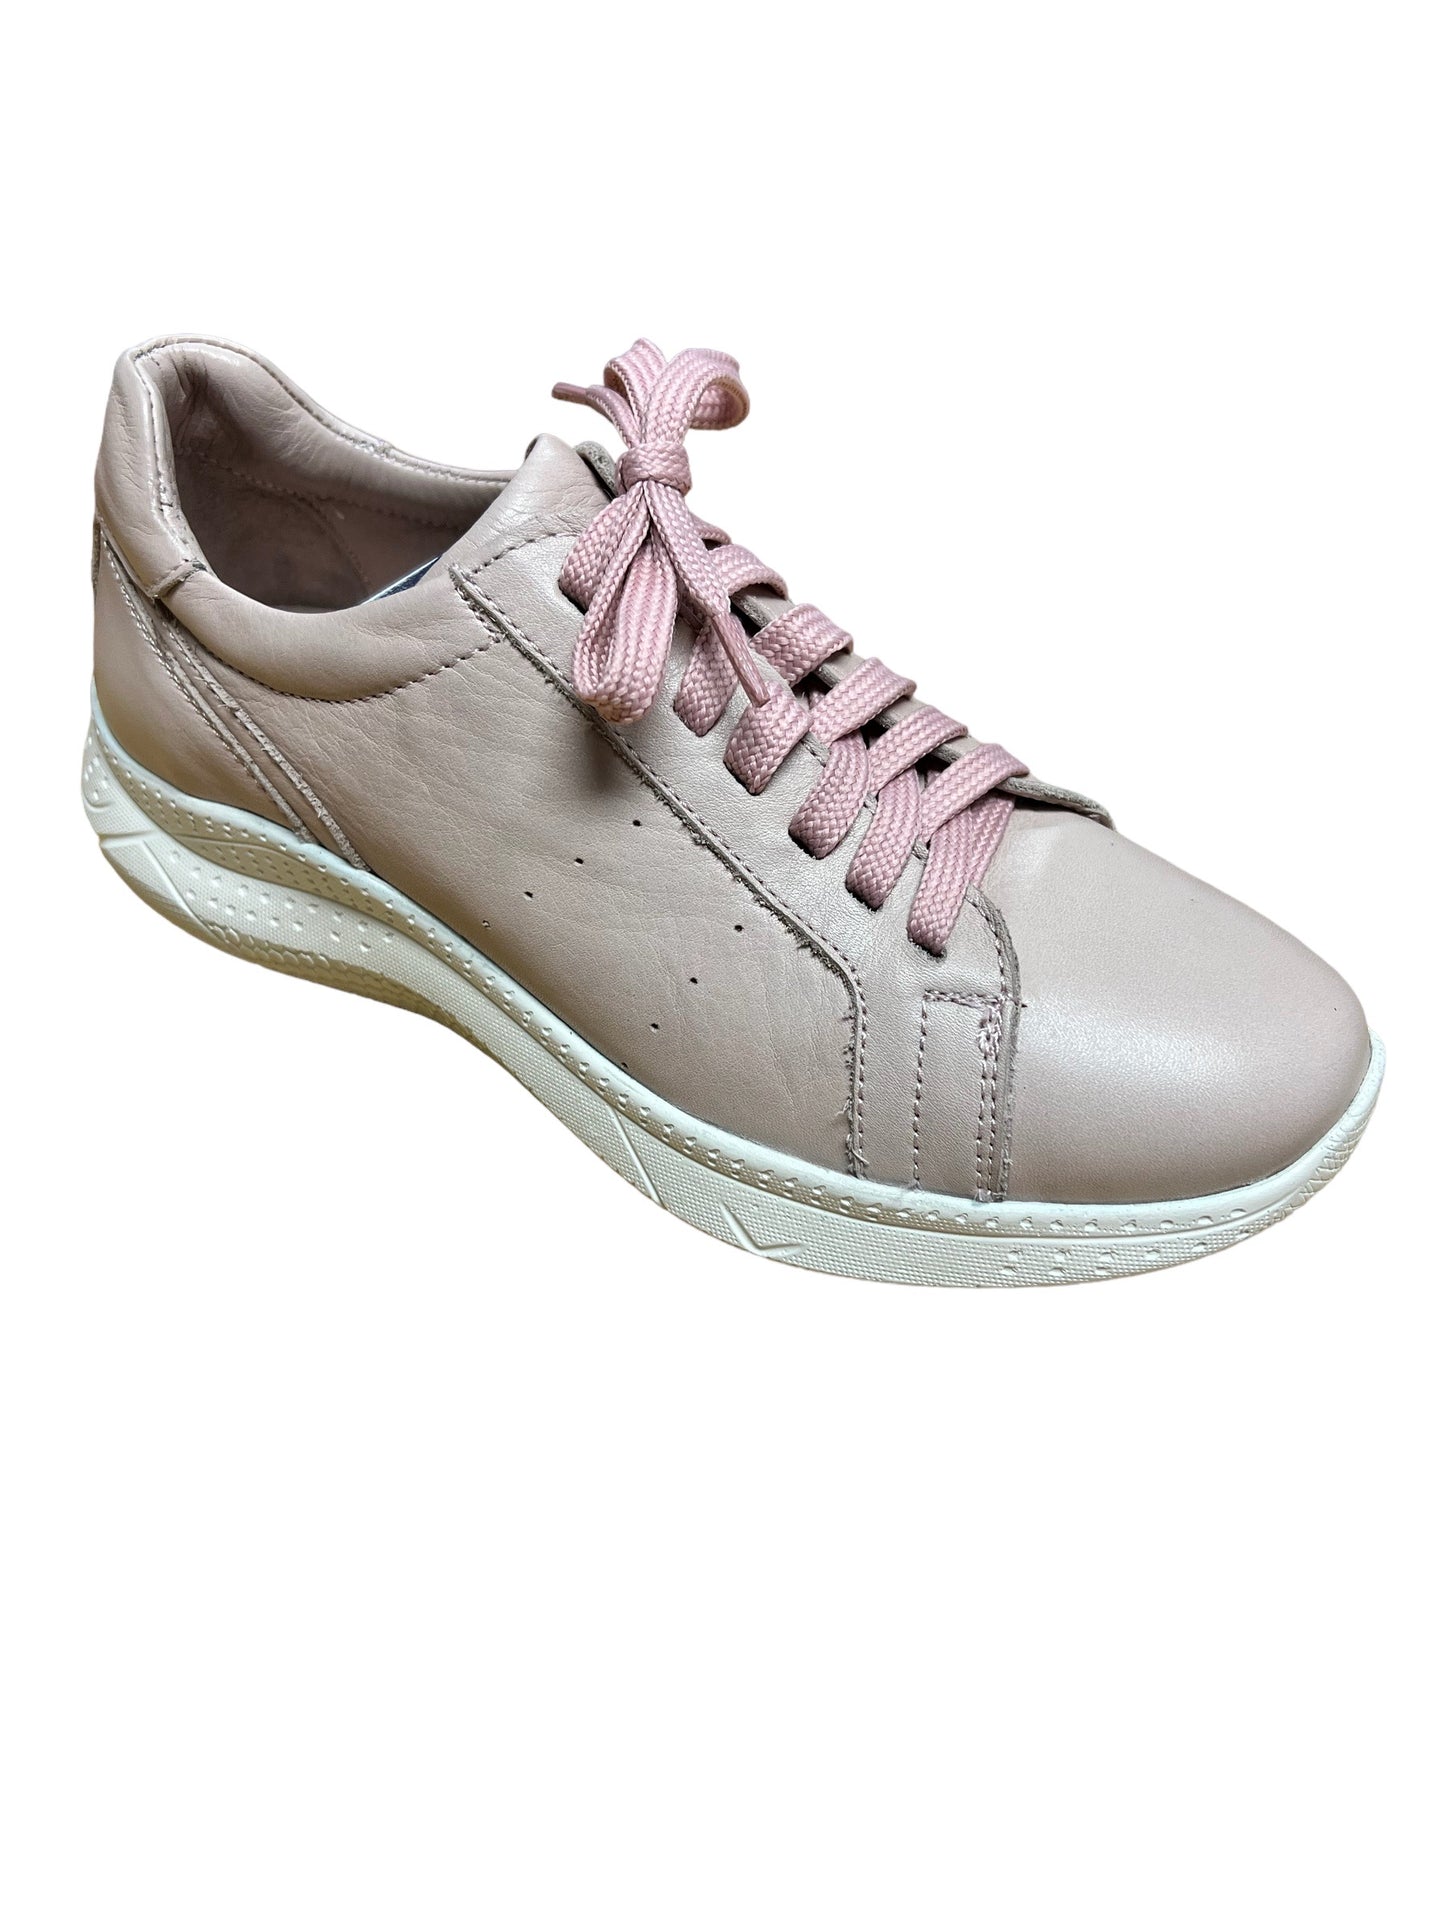 Women's Volks Walkers Leather Casual Shoes